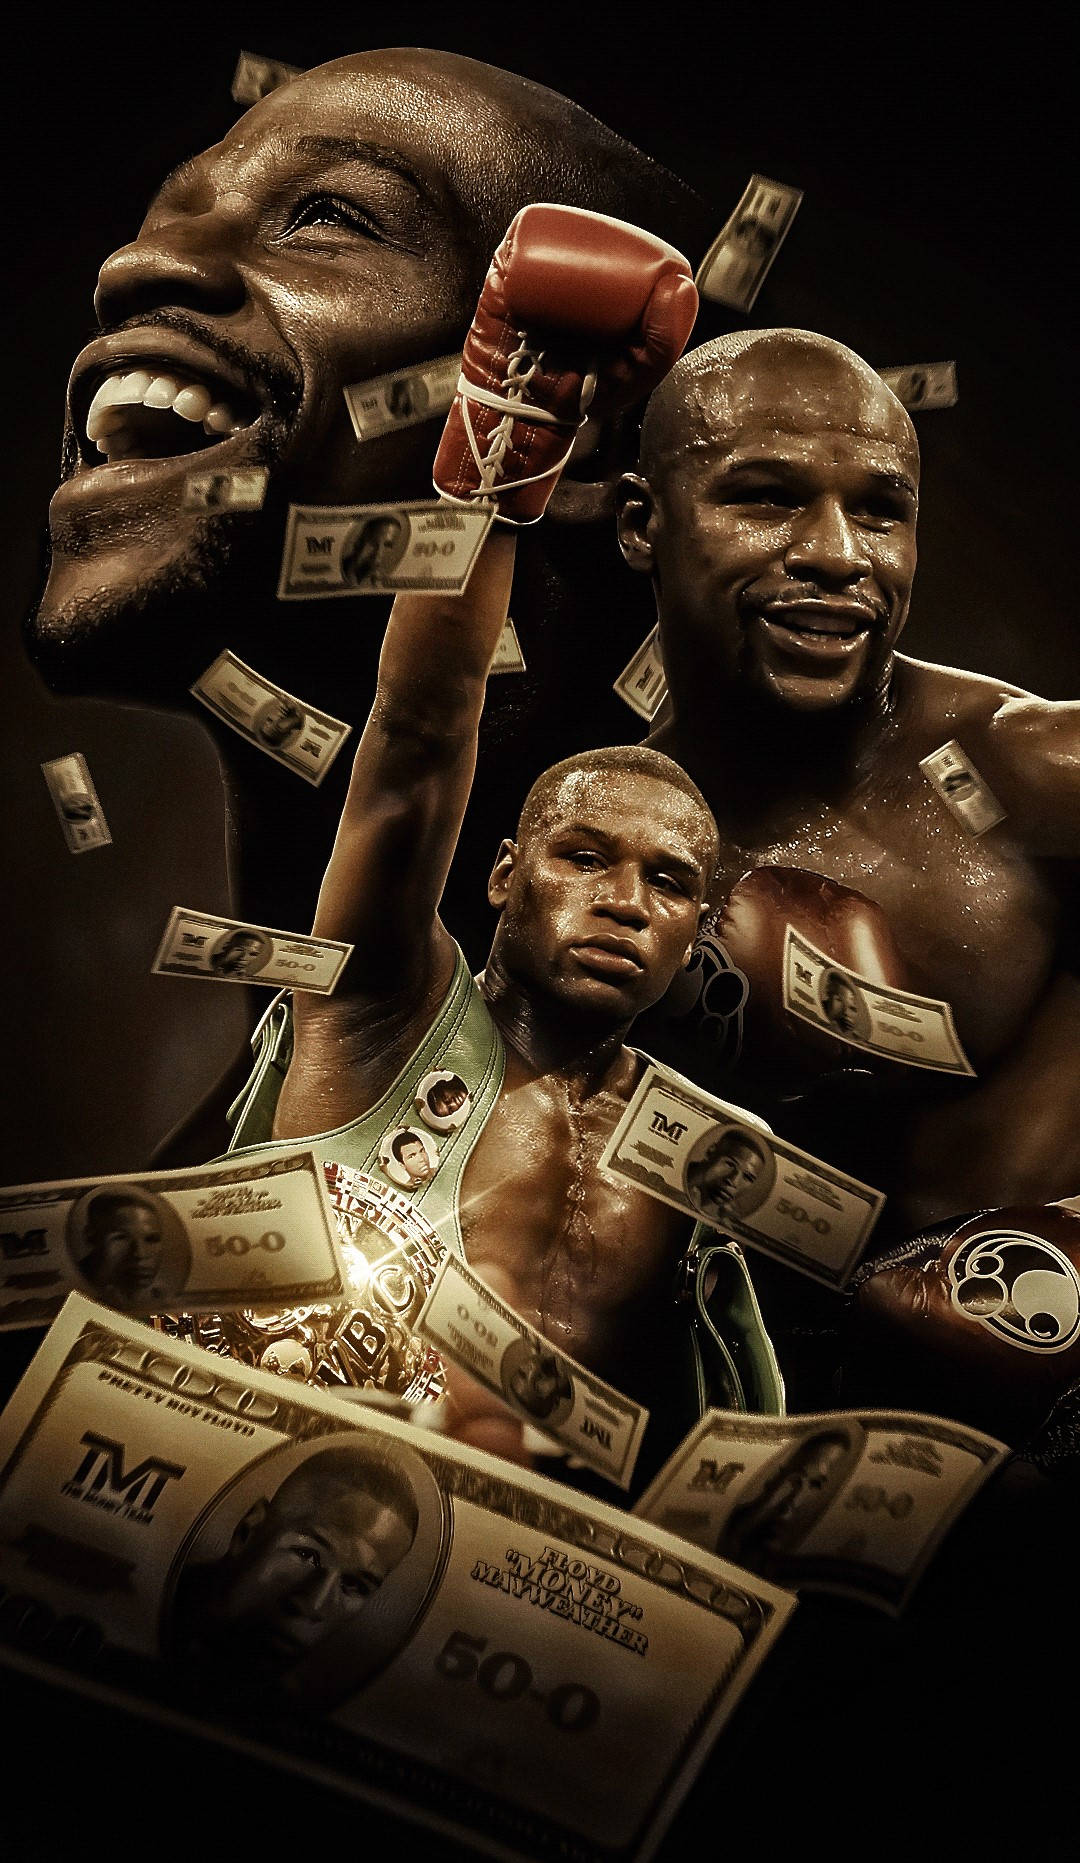 iPhoneXpapers - hf31-floyd-mayweather-boxer-sports